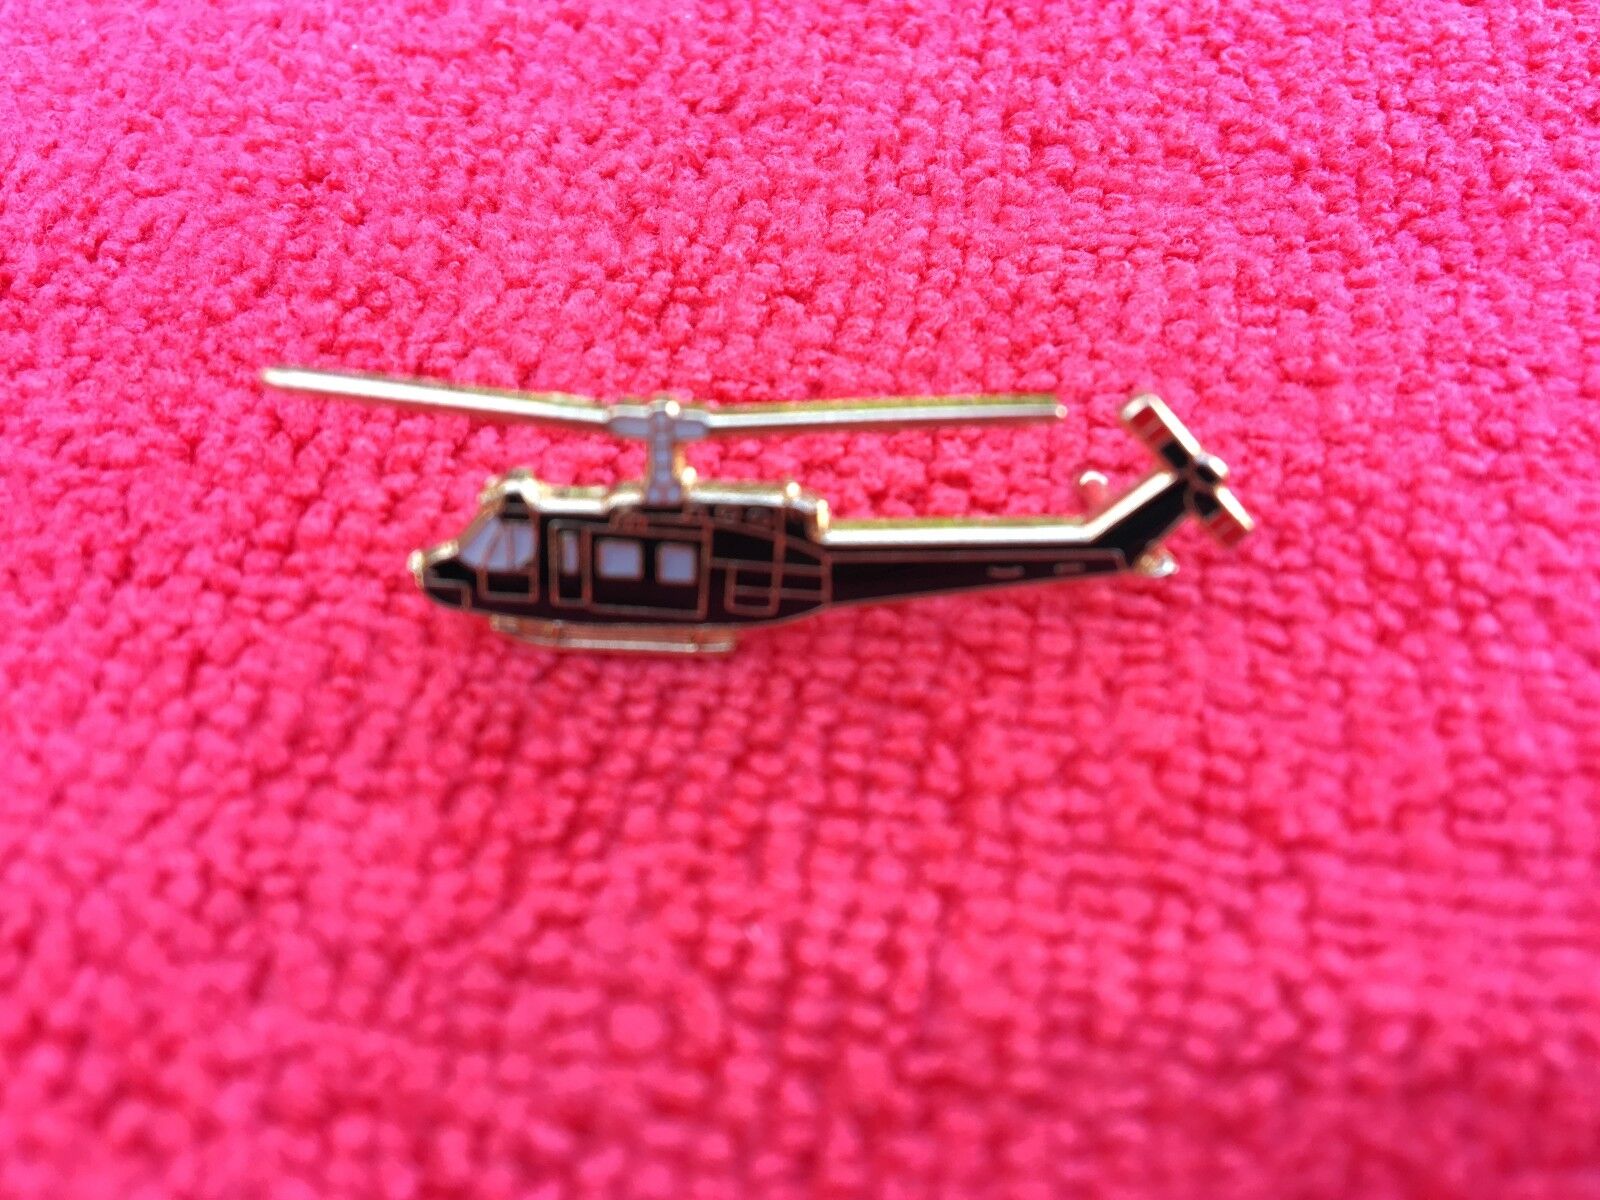 UH-1 HUEY HELICOPTER HAT/LAPEL PIN